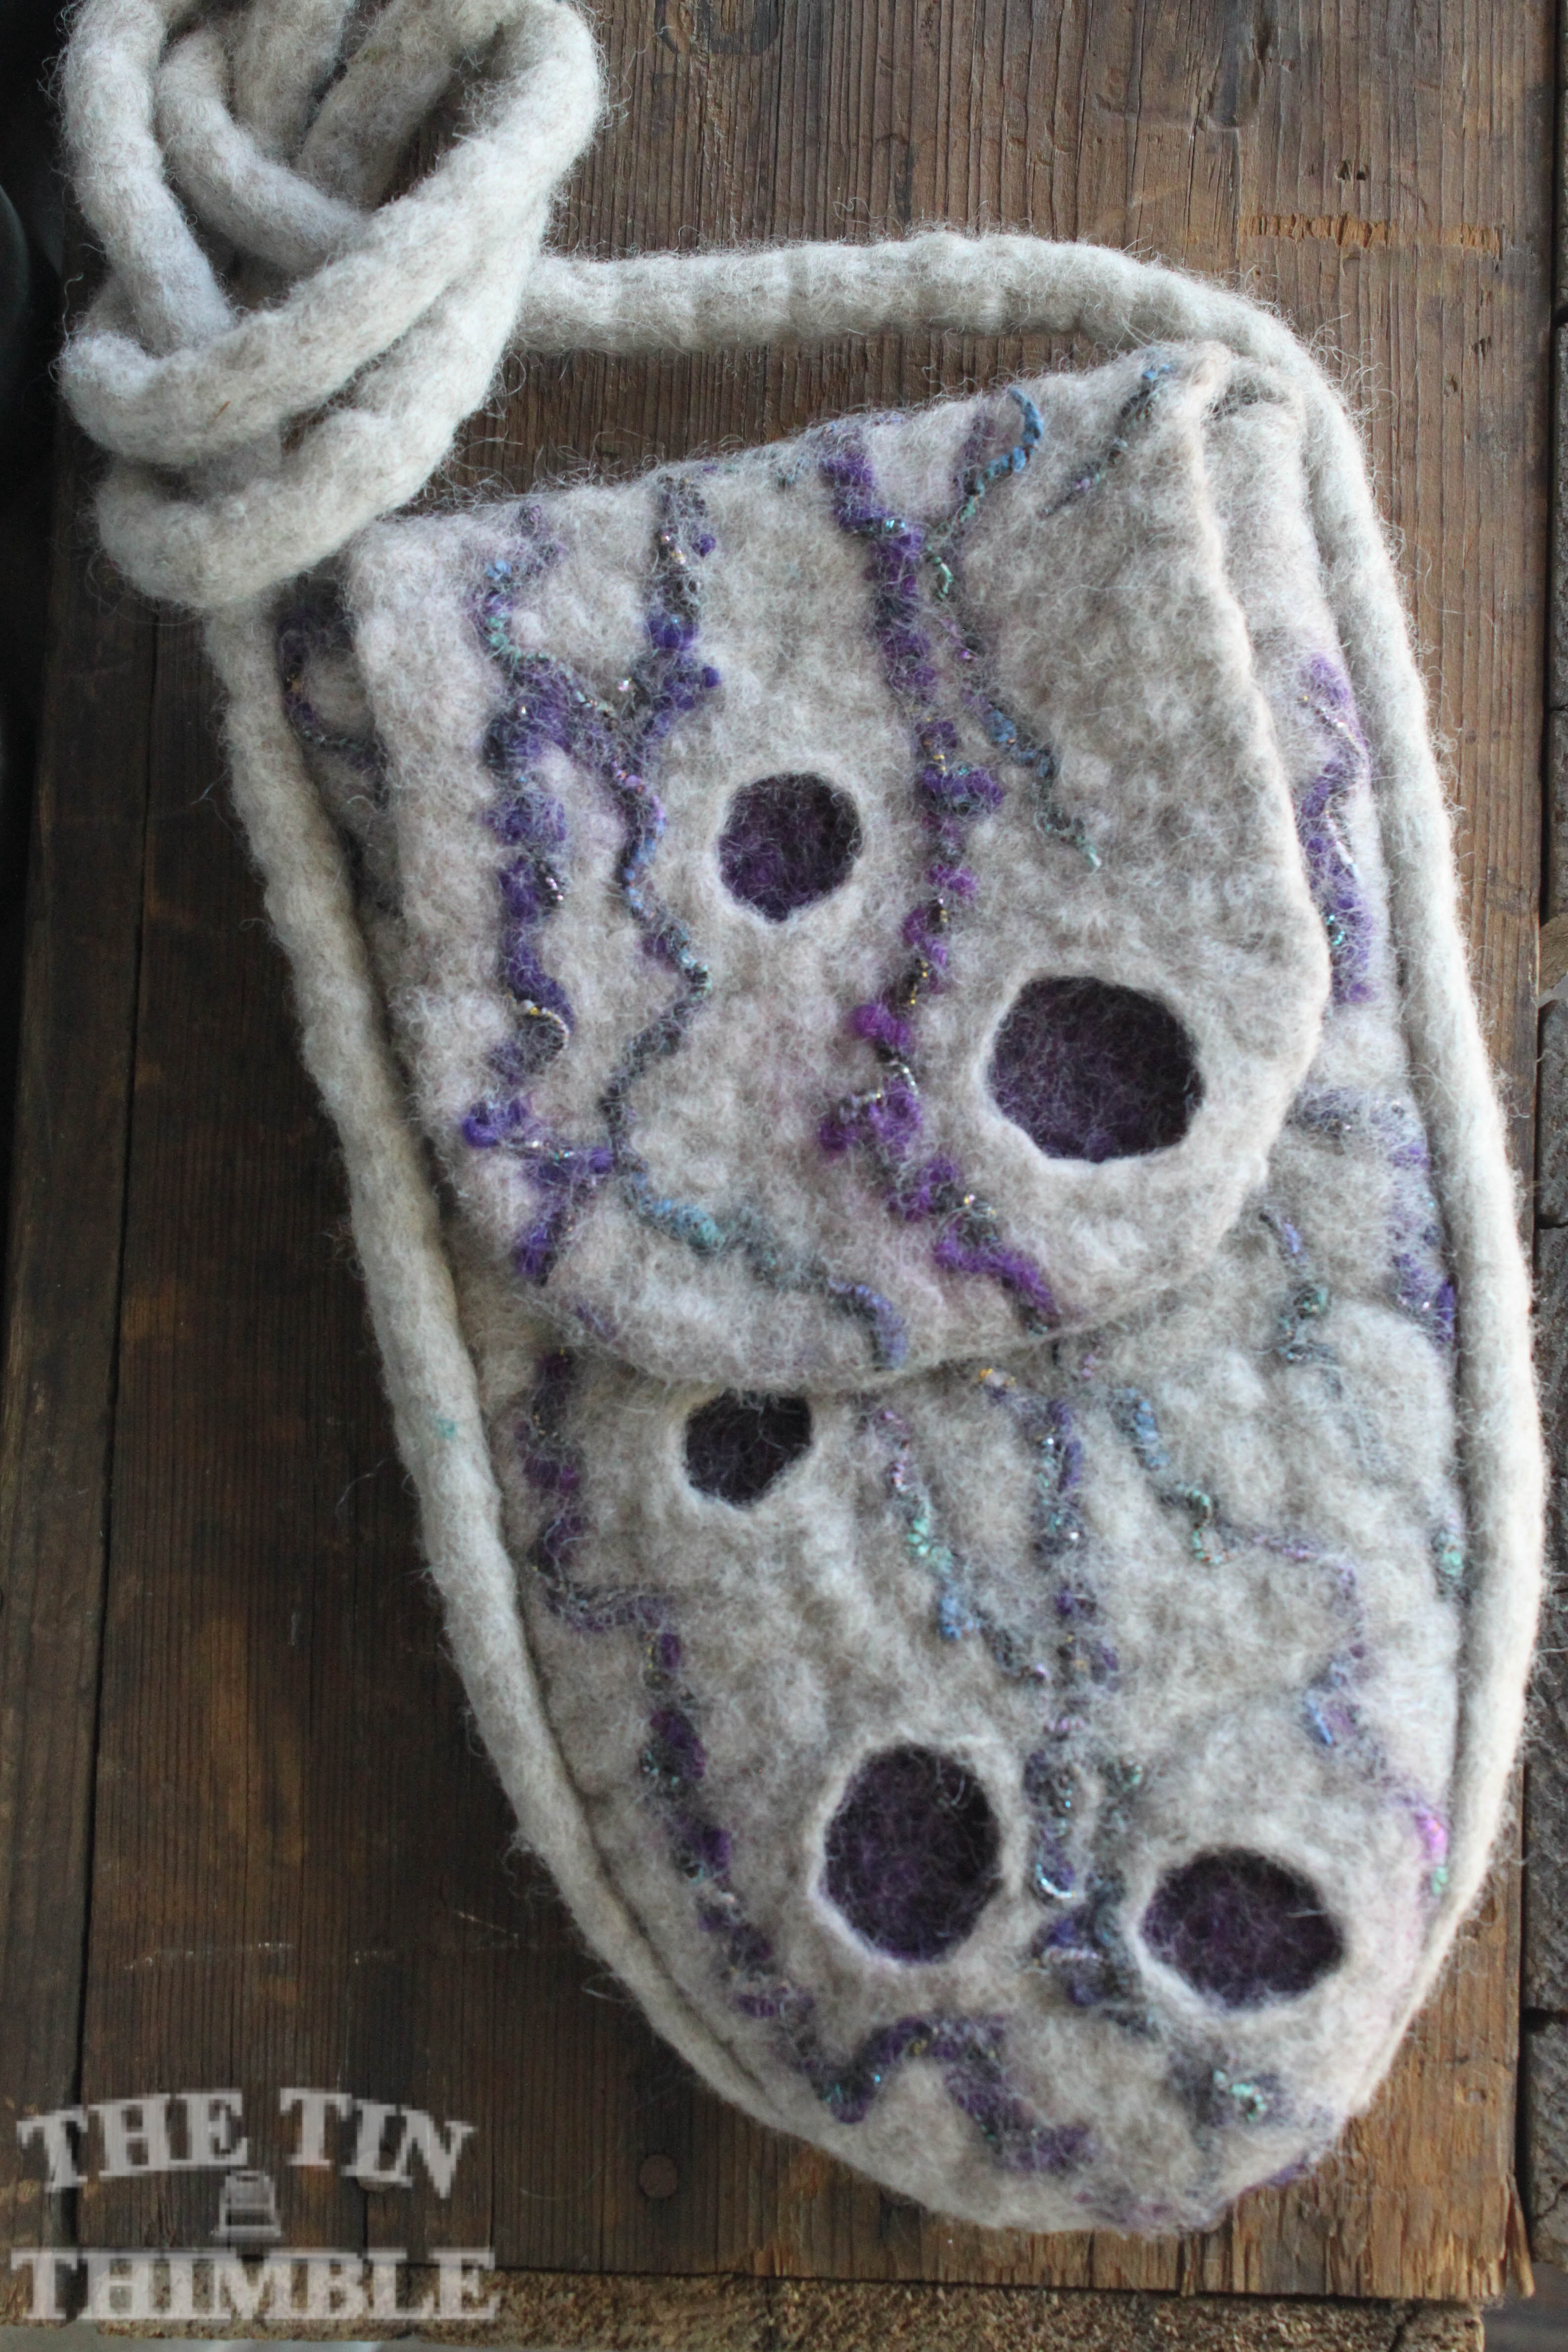 Wet Felted Essentials Pouch by Toni Lutman